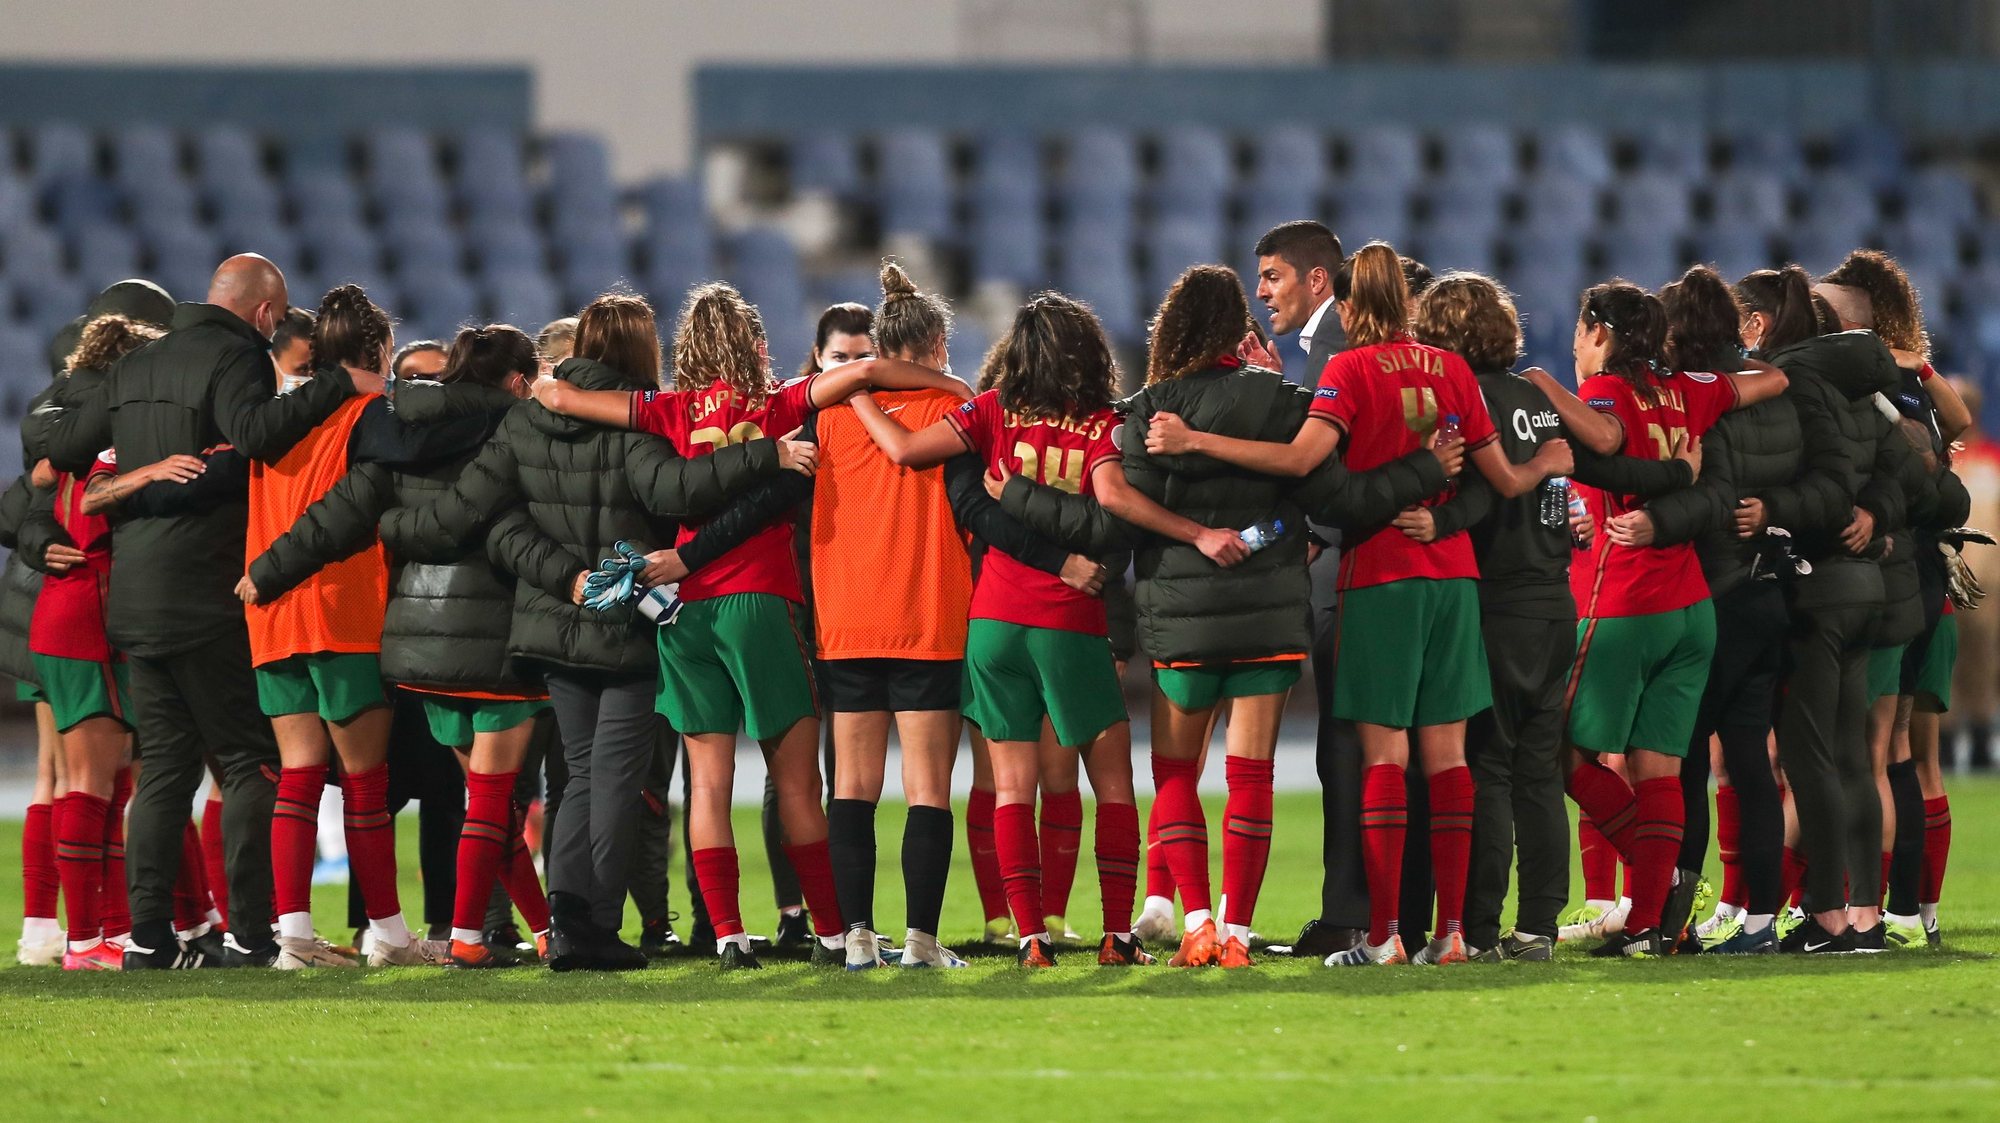 Portugal&#039;s head coach Francisco Neto talks the her players in the end of UEFA Women&#039;s EURO play-off match against Portugal at Restelo Stadium in Lisbon, 9 of April 2021. MIGUEL A. LOPES/LUSA